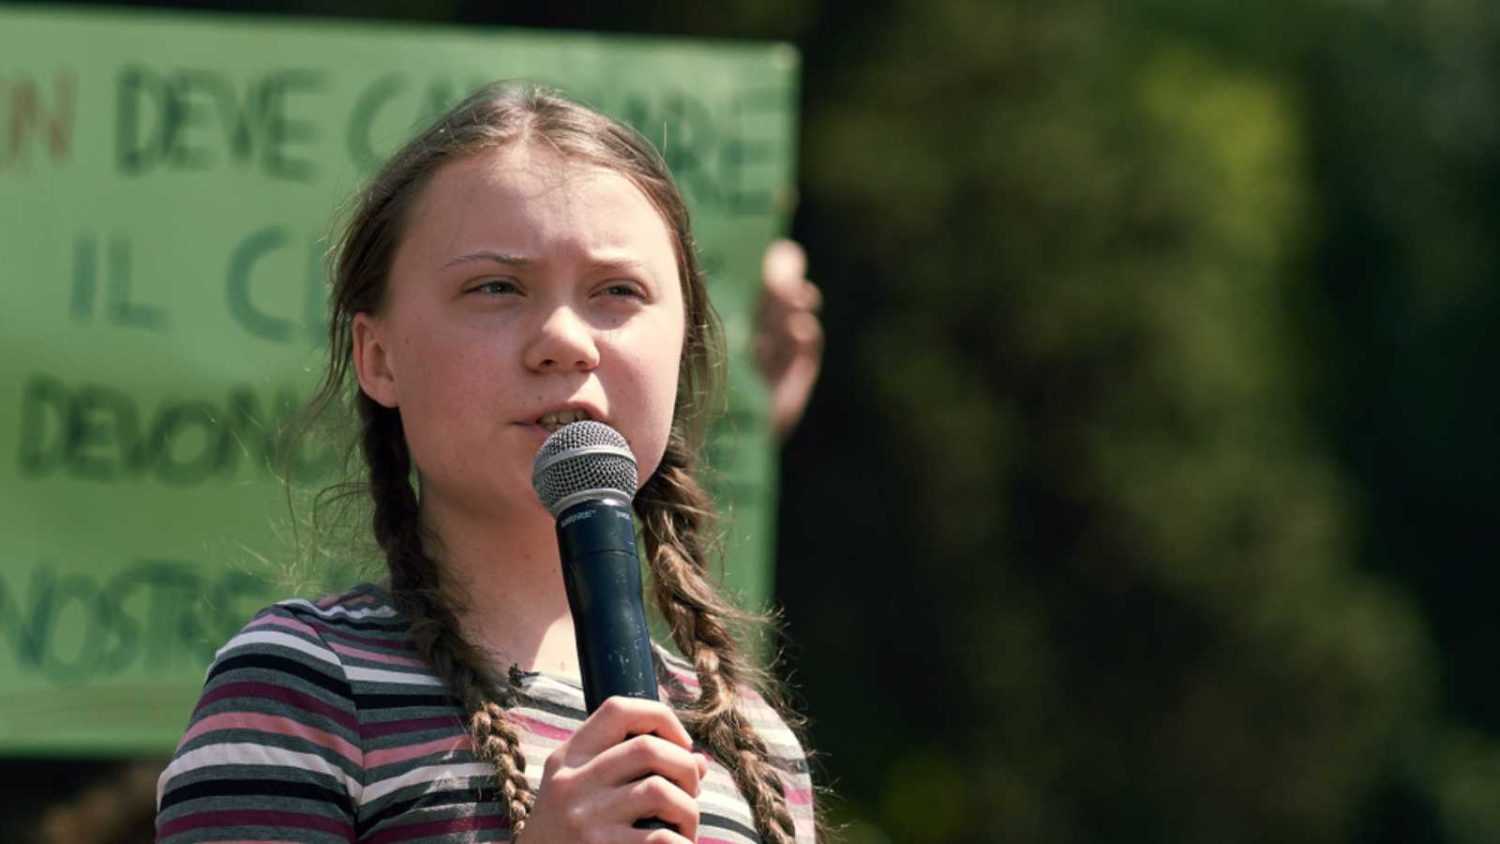 Greta Thunberg, the Famous Swedish Climate Activist (Fridays for Future), Speaking to the Crowd in Rome, 2019. In February 2021 Her Effigies Were Burned in Delhi After Tweets on Indian Farmers Protest